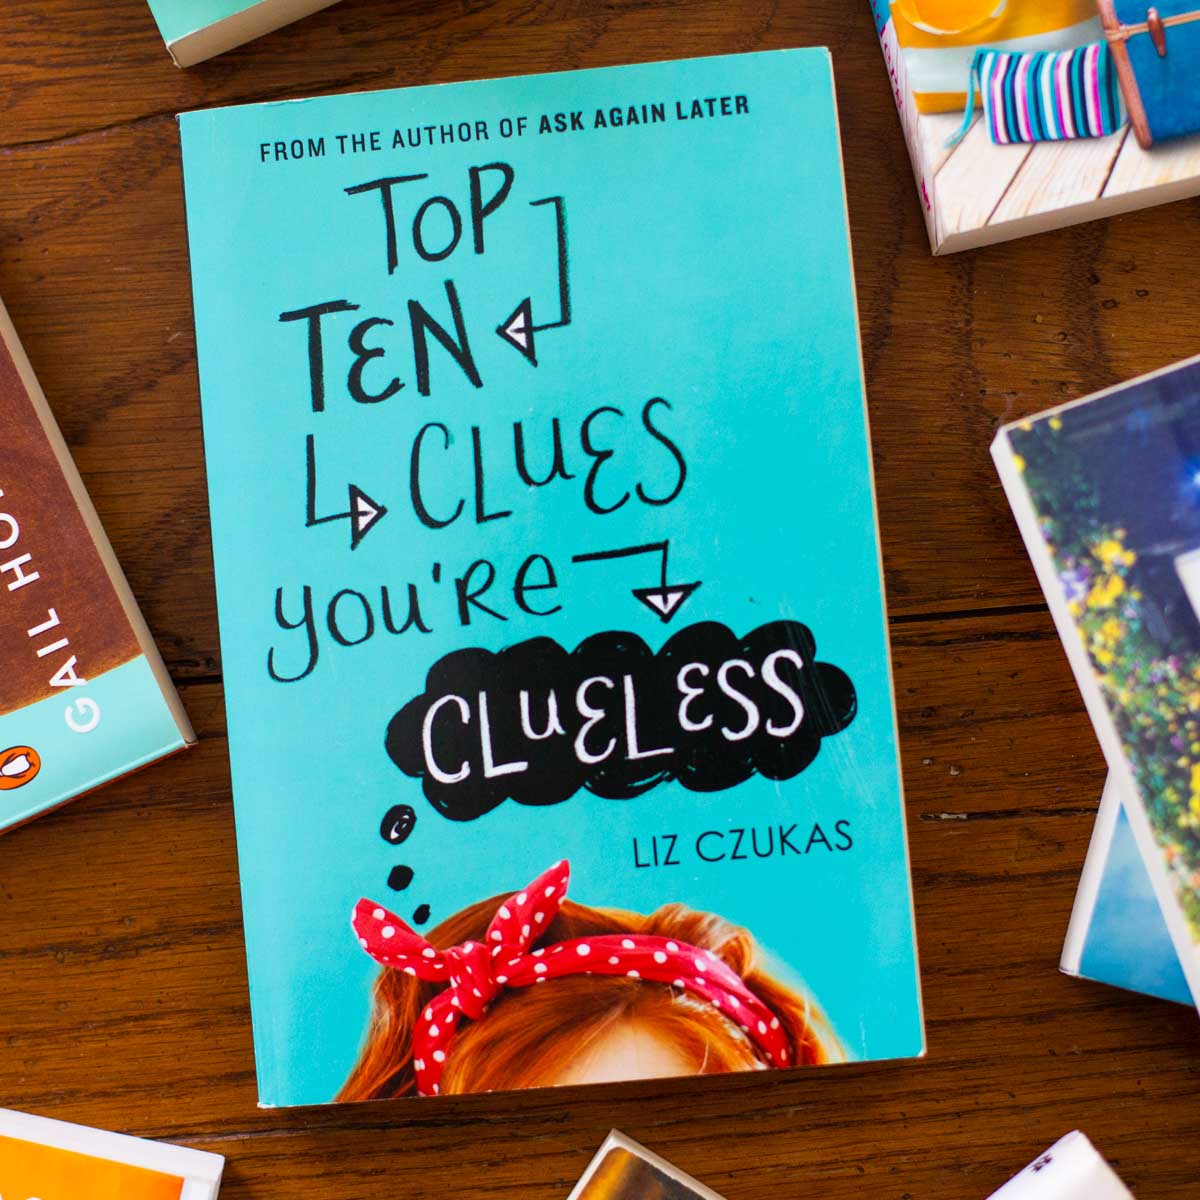 A copy of Top Ten Clues You're Clueless sits on a table.